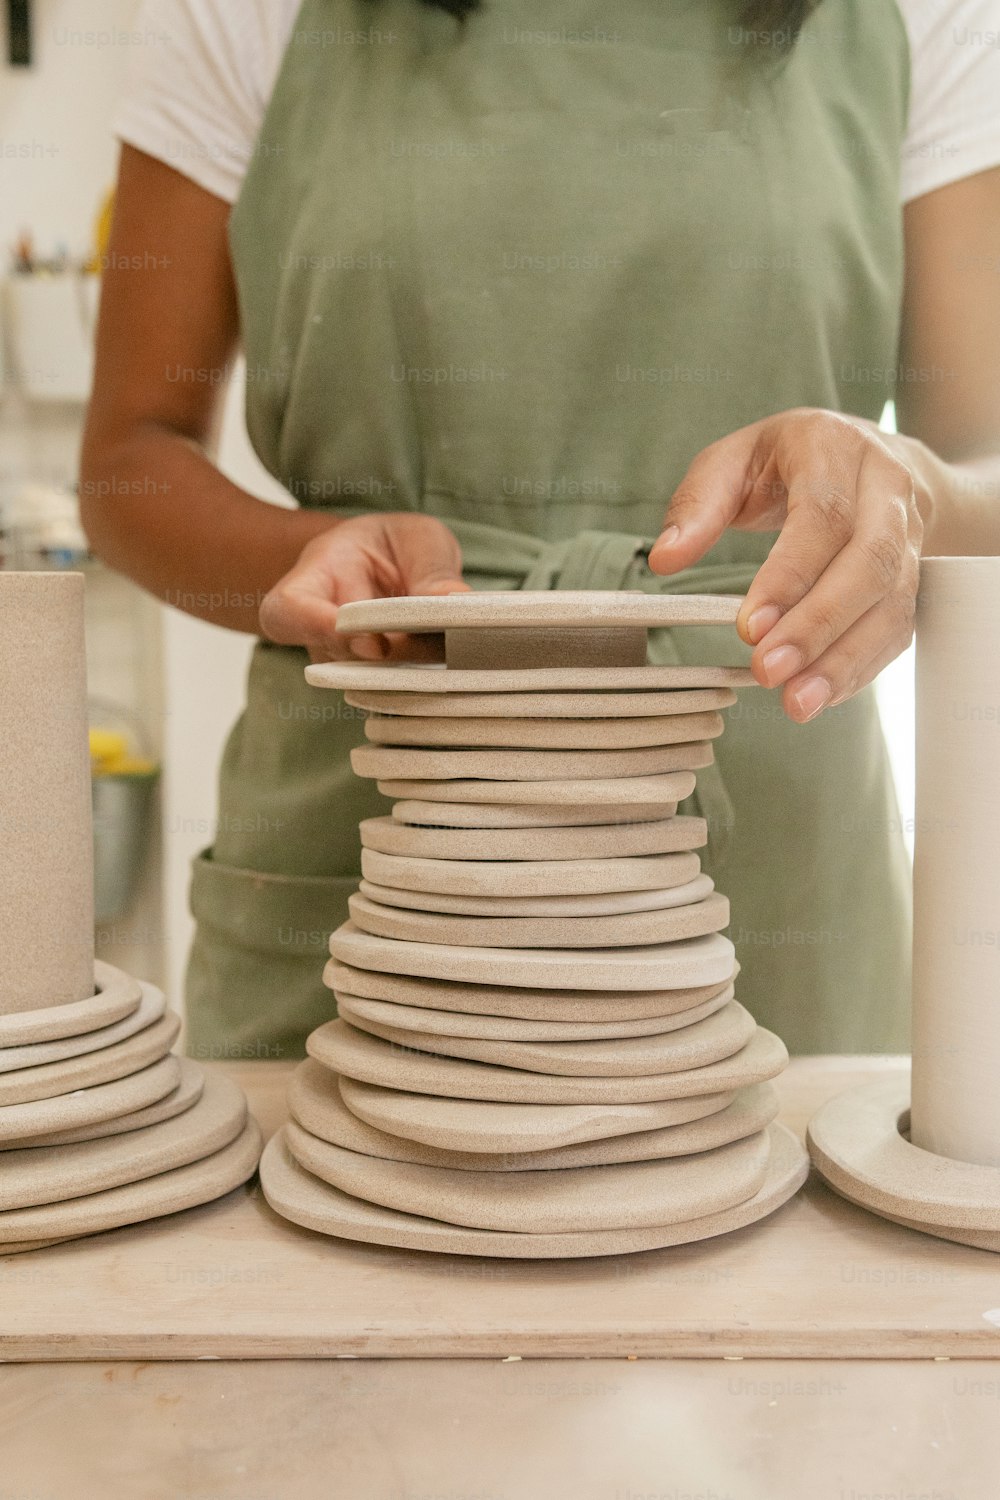 a woman is making a stack of plates